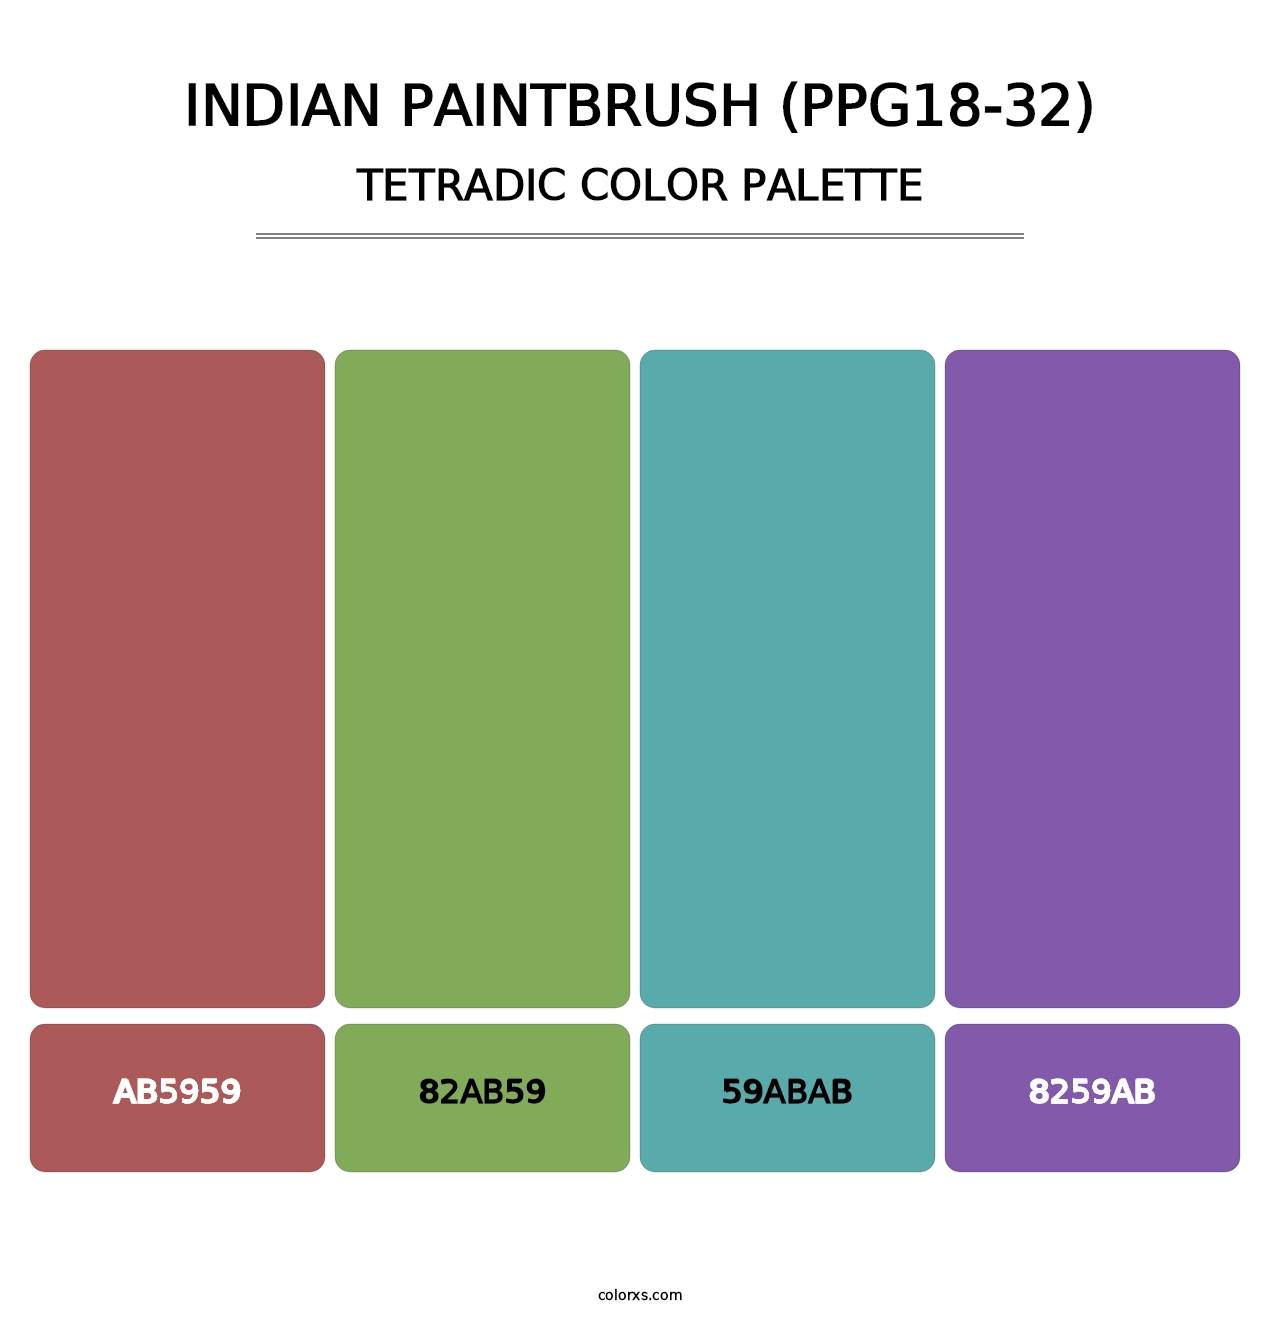 Indian Paintbrush (PPG18-32) - Tetradic Color Palette